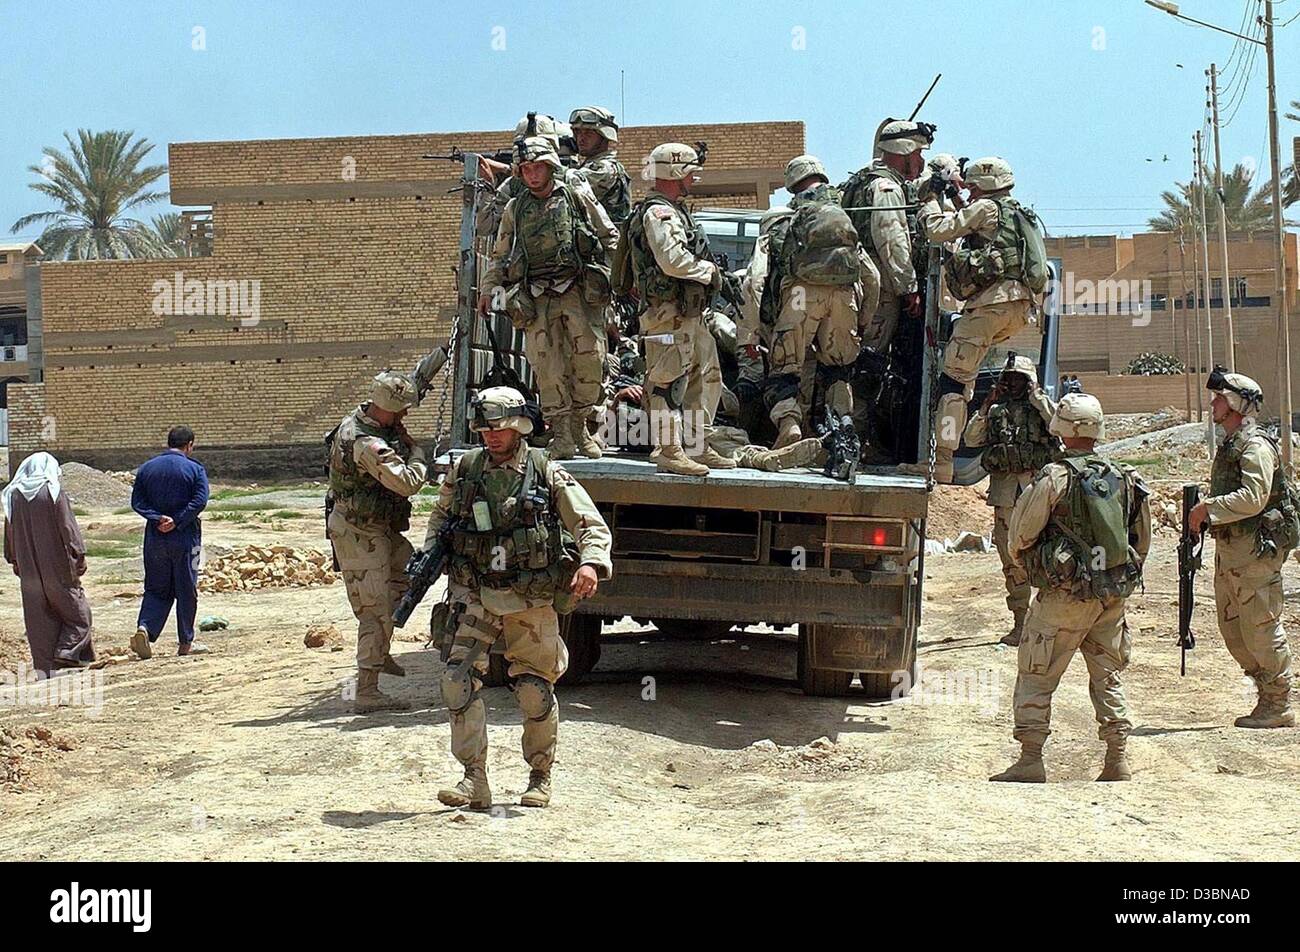 (dpa) - US soldiers patrol a suburb of Baghdad, Iraq, Asia, 24 April 2003. Presently, security is one of the most important themes in Iraq. Stock Photo